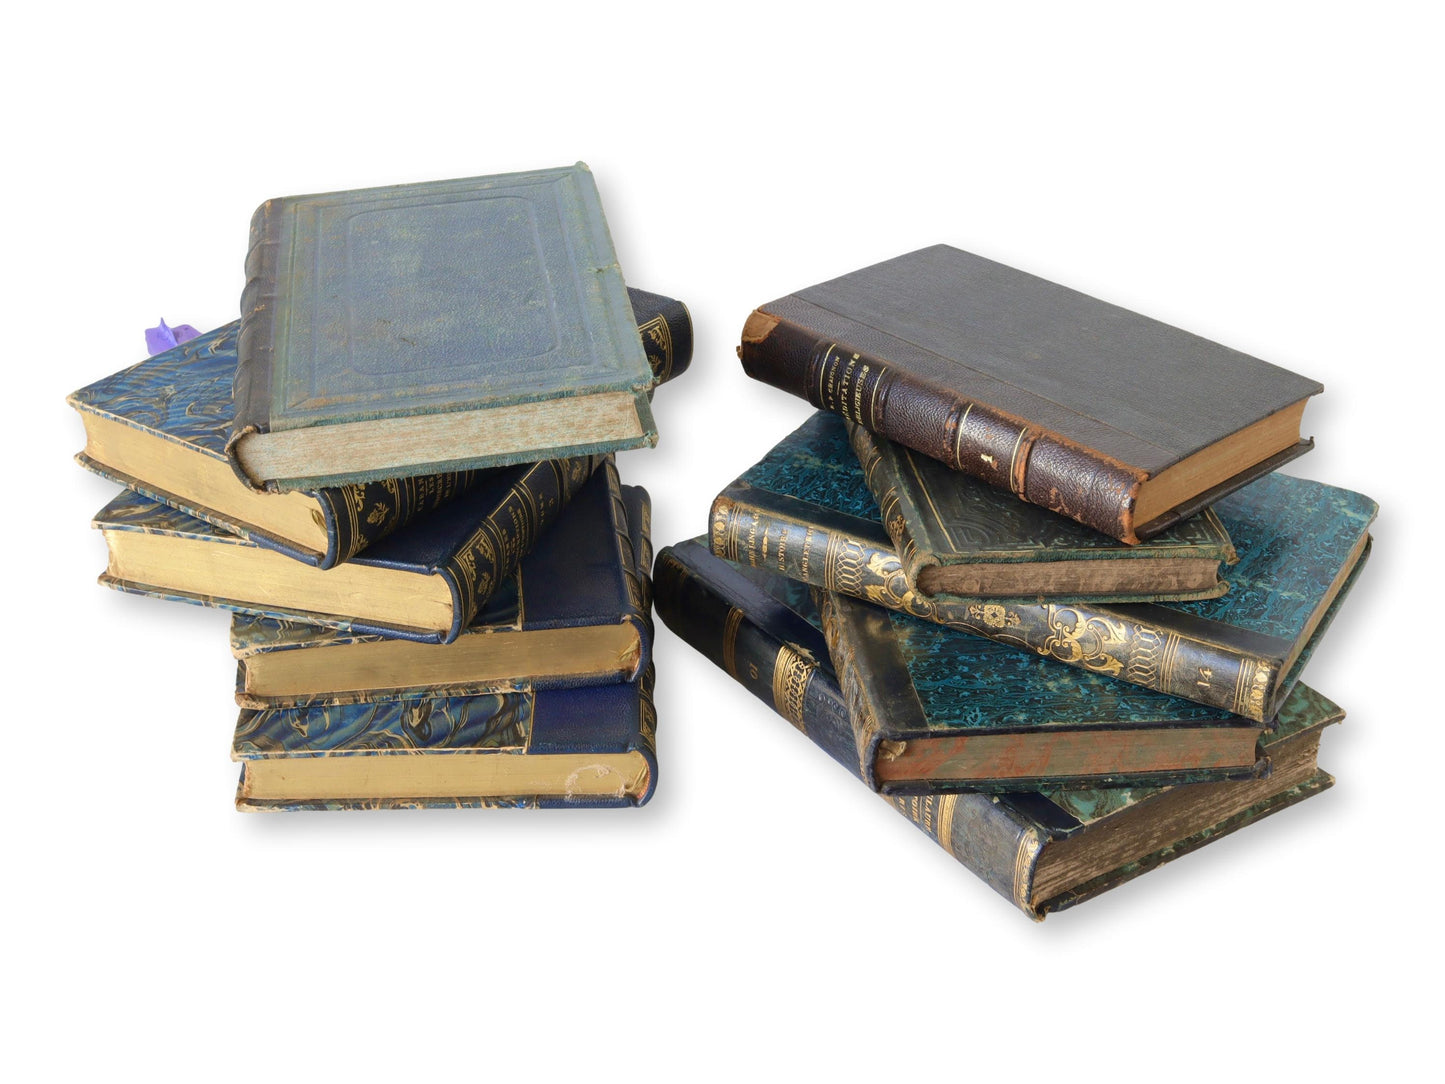 Antique French Leather-Bound Books, S/10